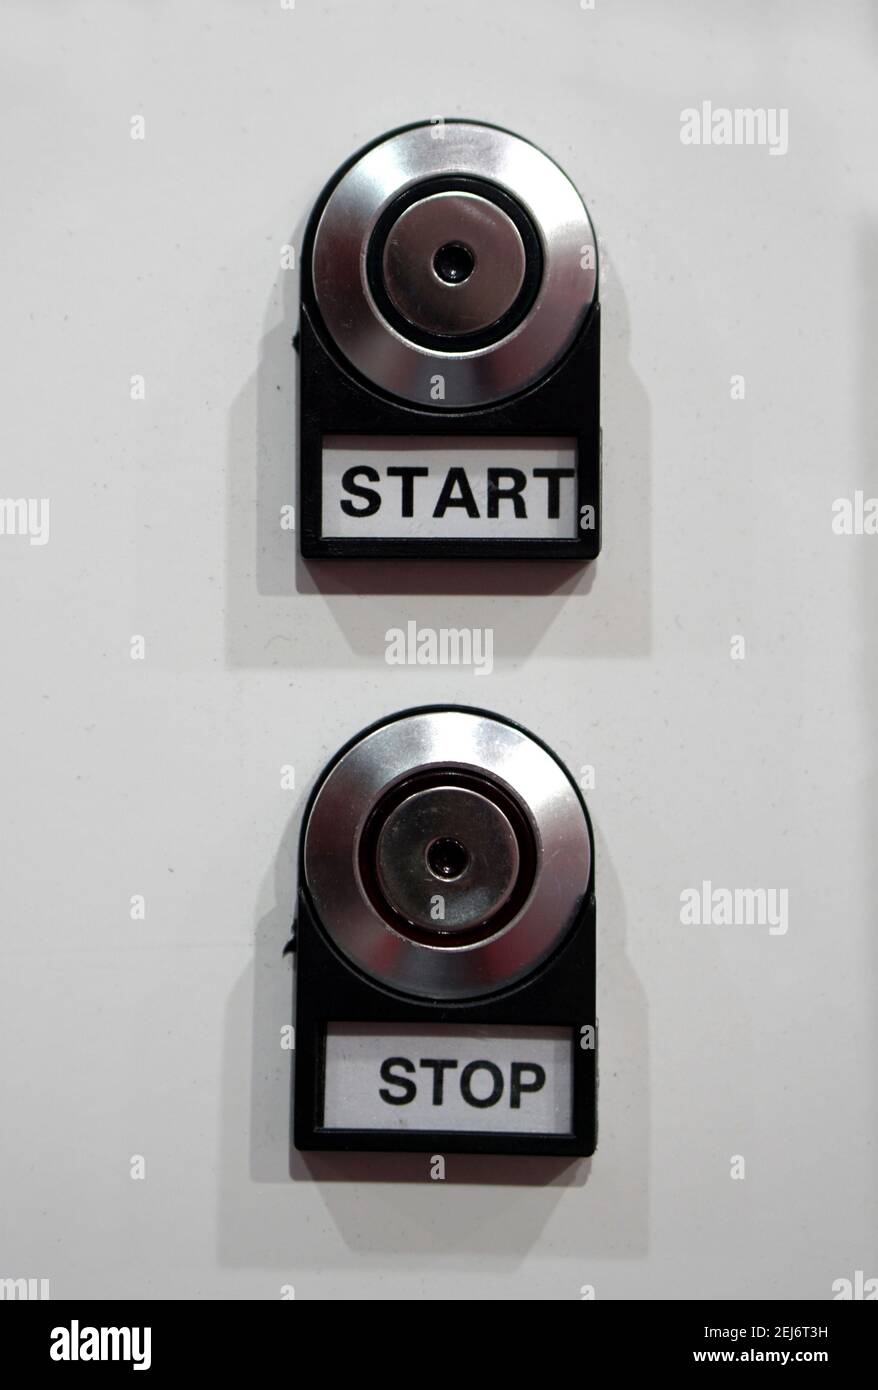 Close-up view of Start and Stop knob on a control panel in an industry Stock Photo